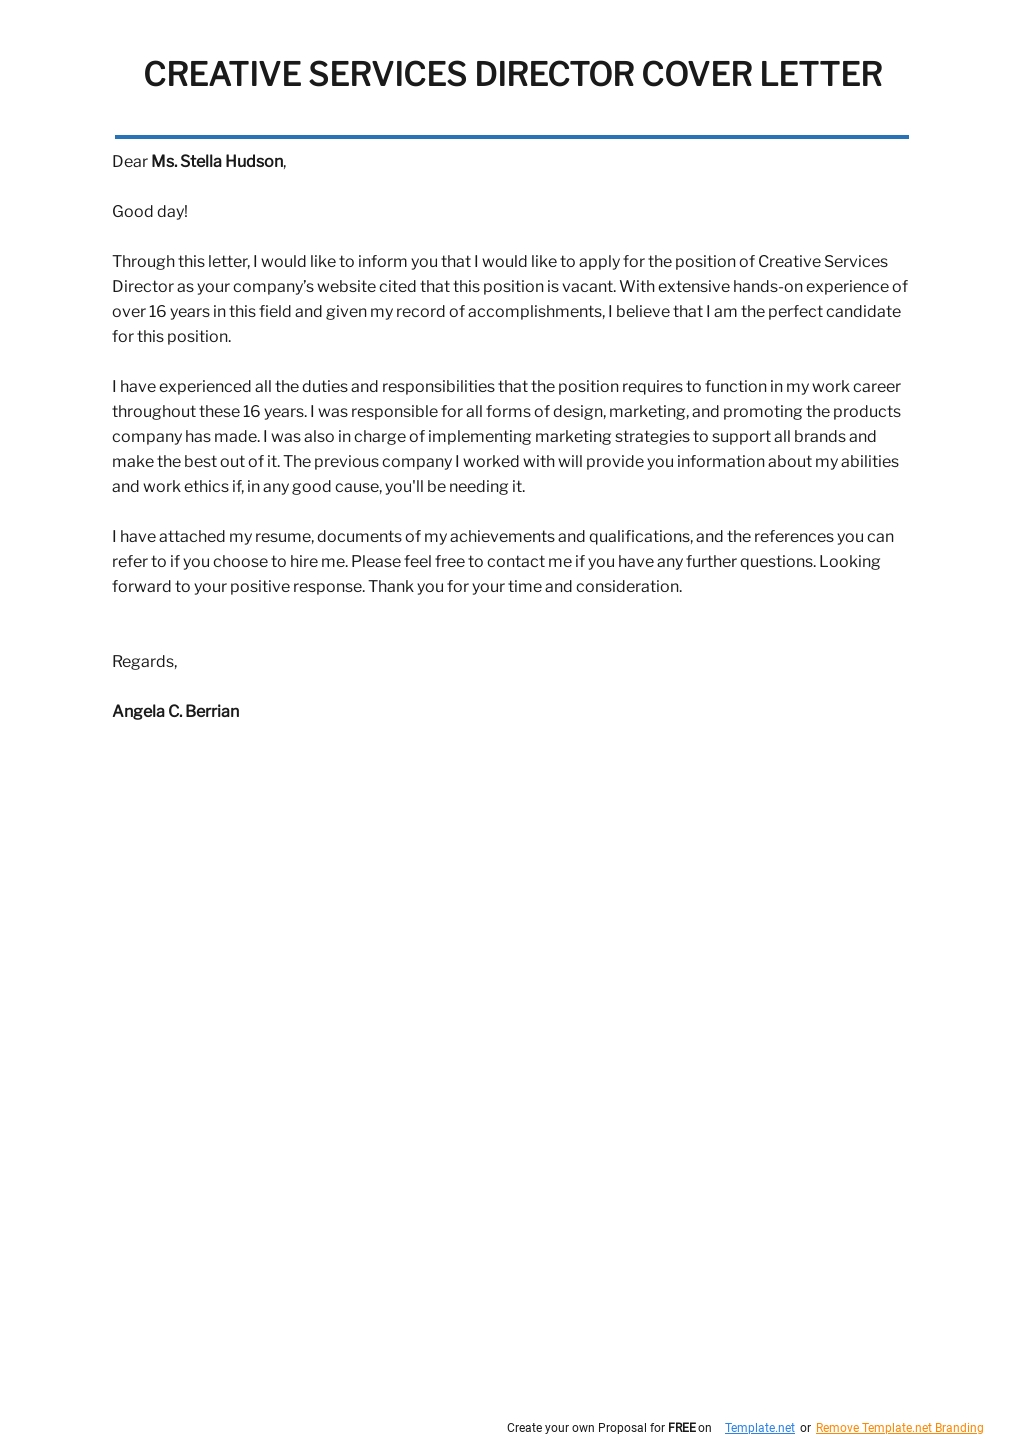 Free Creative Services Director Cover Letter Template.jpe